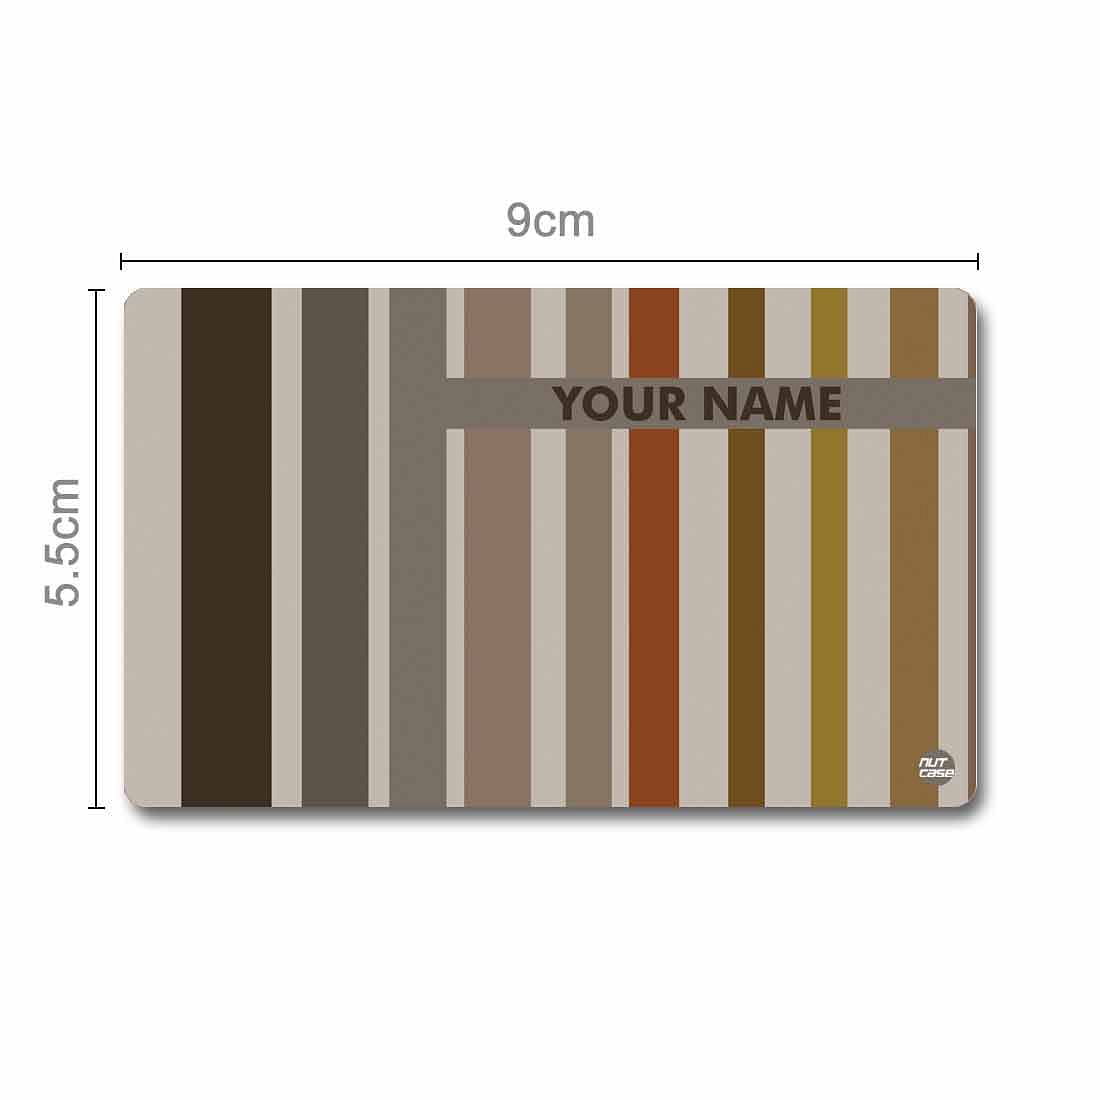 Personalized NFC Smart Card -  Brown Lines Nutcase